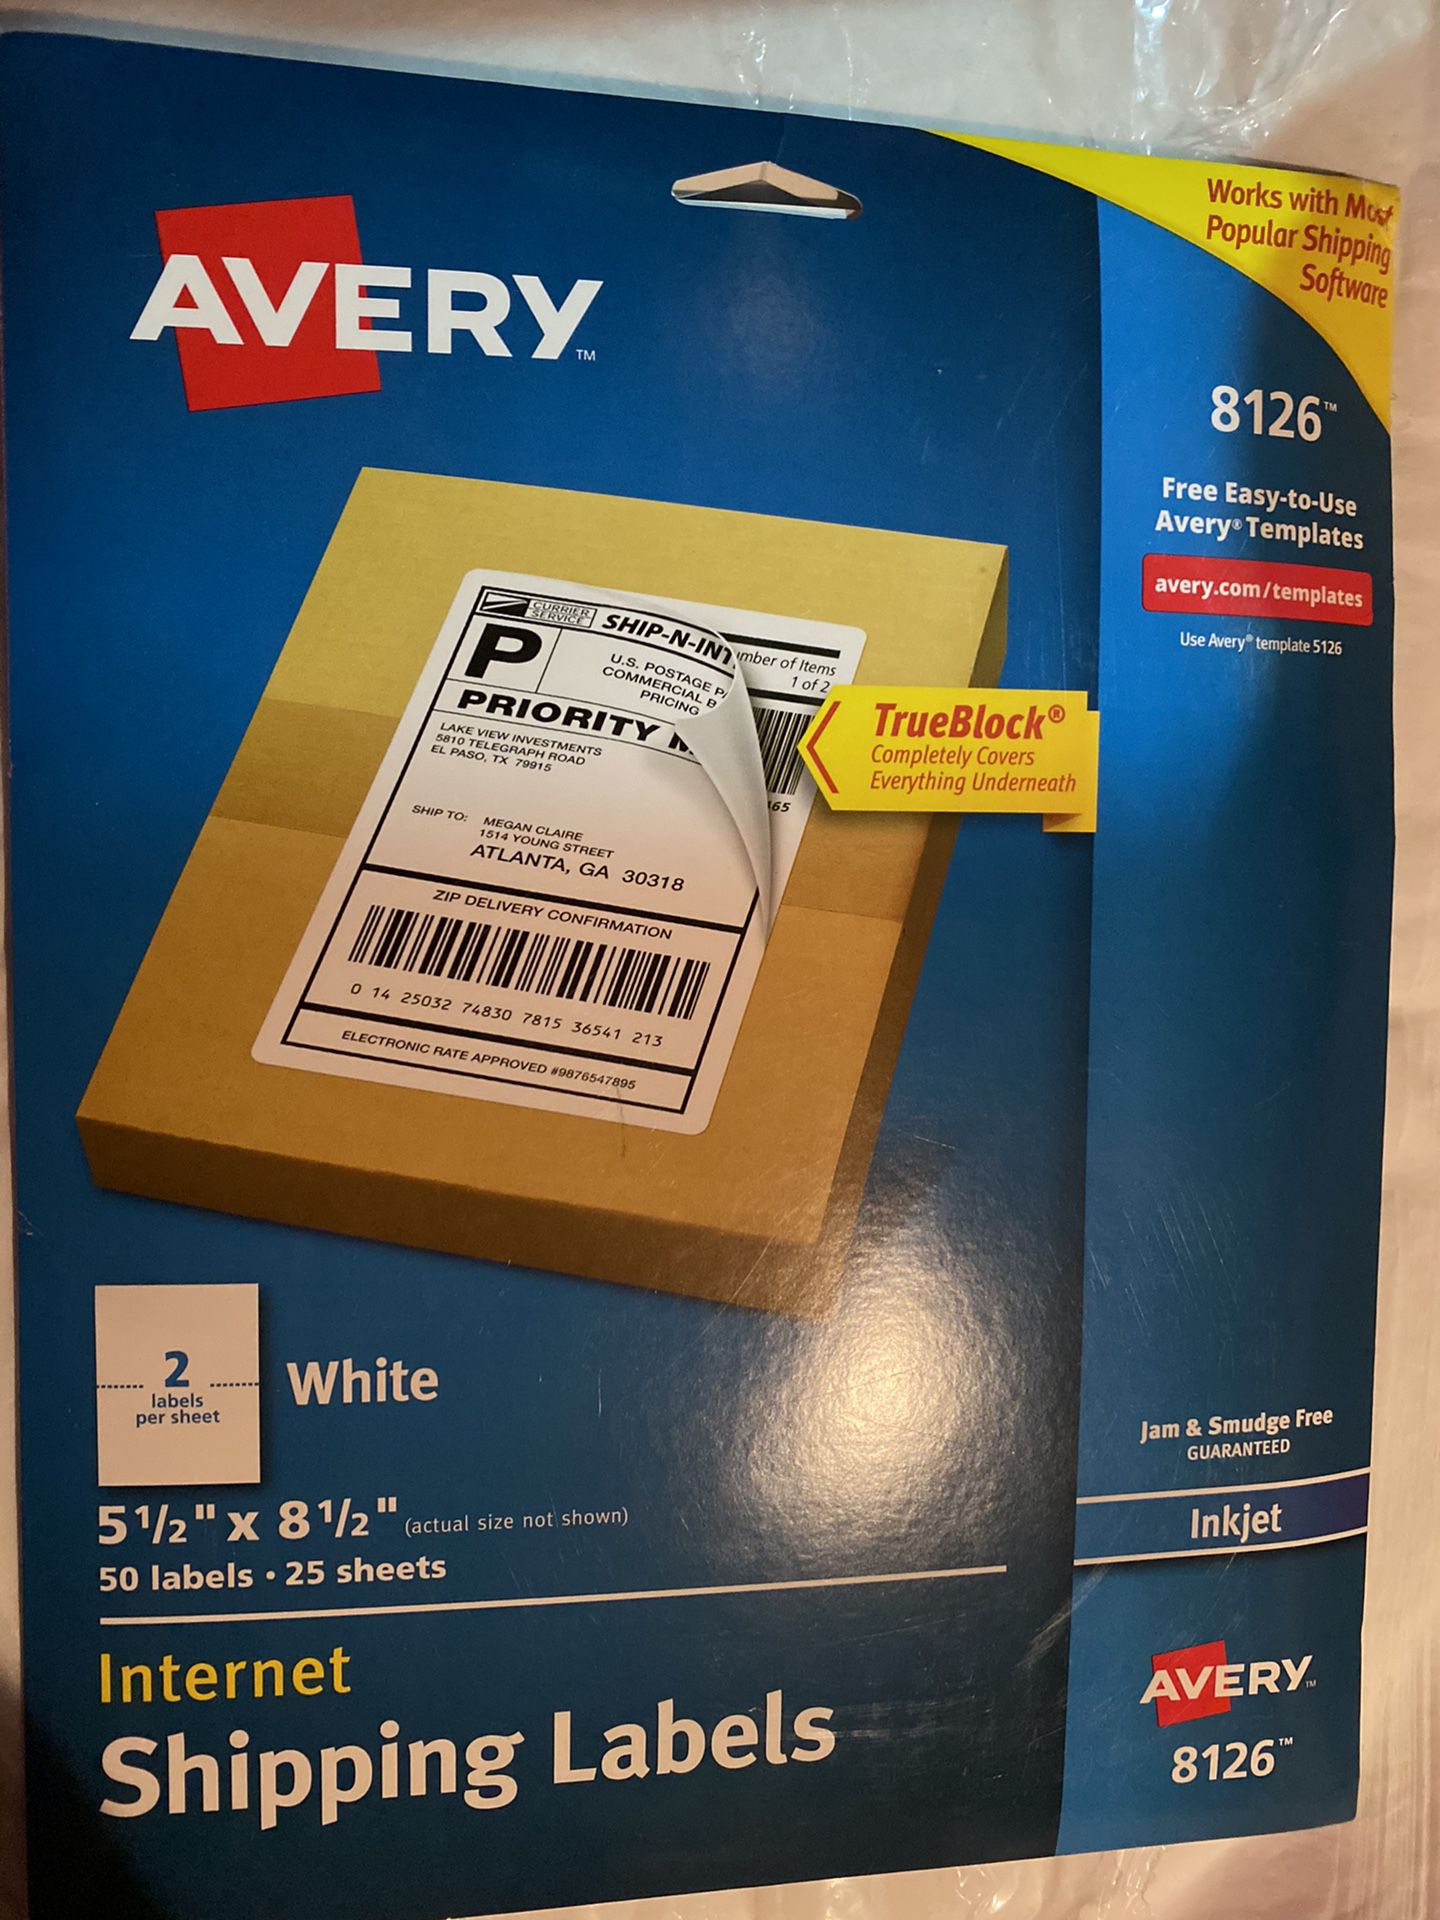 Avery Shipping Labels Brand New never opened 5 1/2”x8 1/2” 50 labels